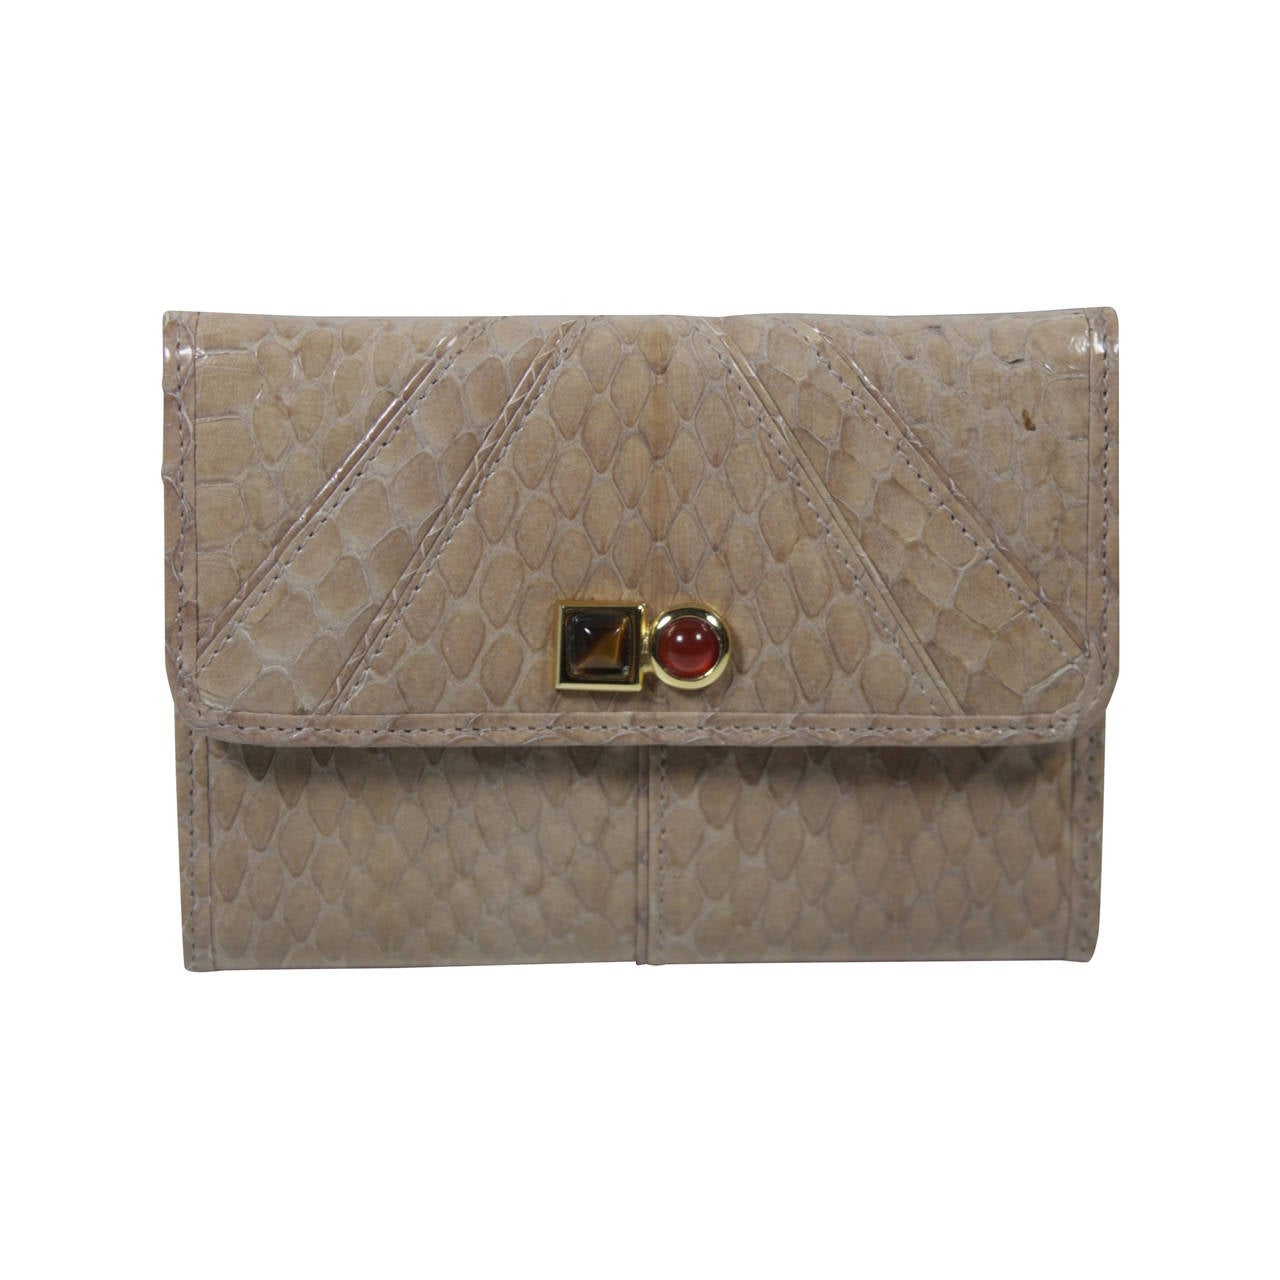 Judith Leiber Nude Snakeskin Wallet with Gold Hardware